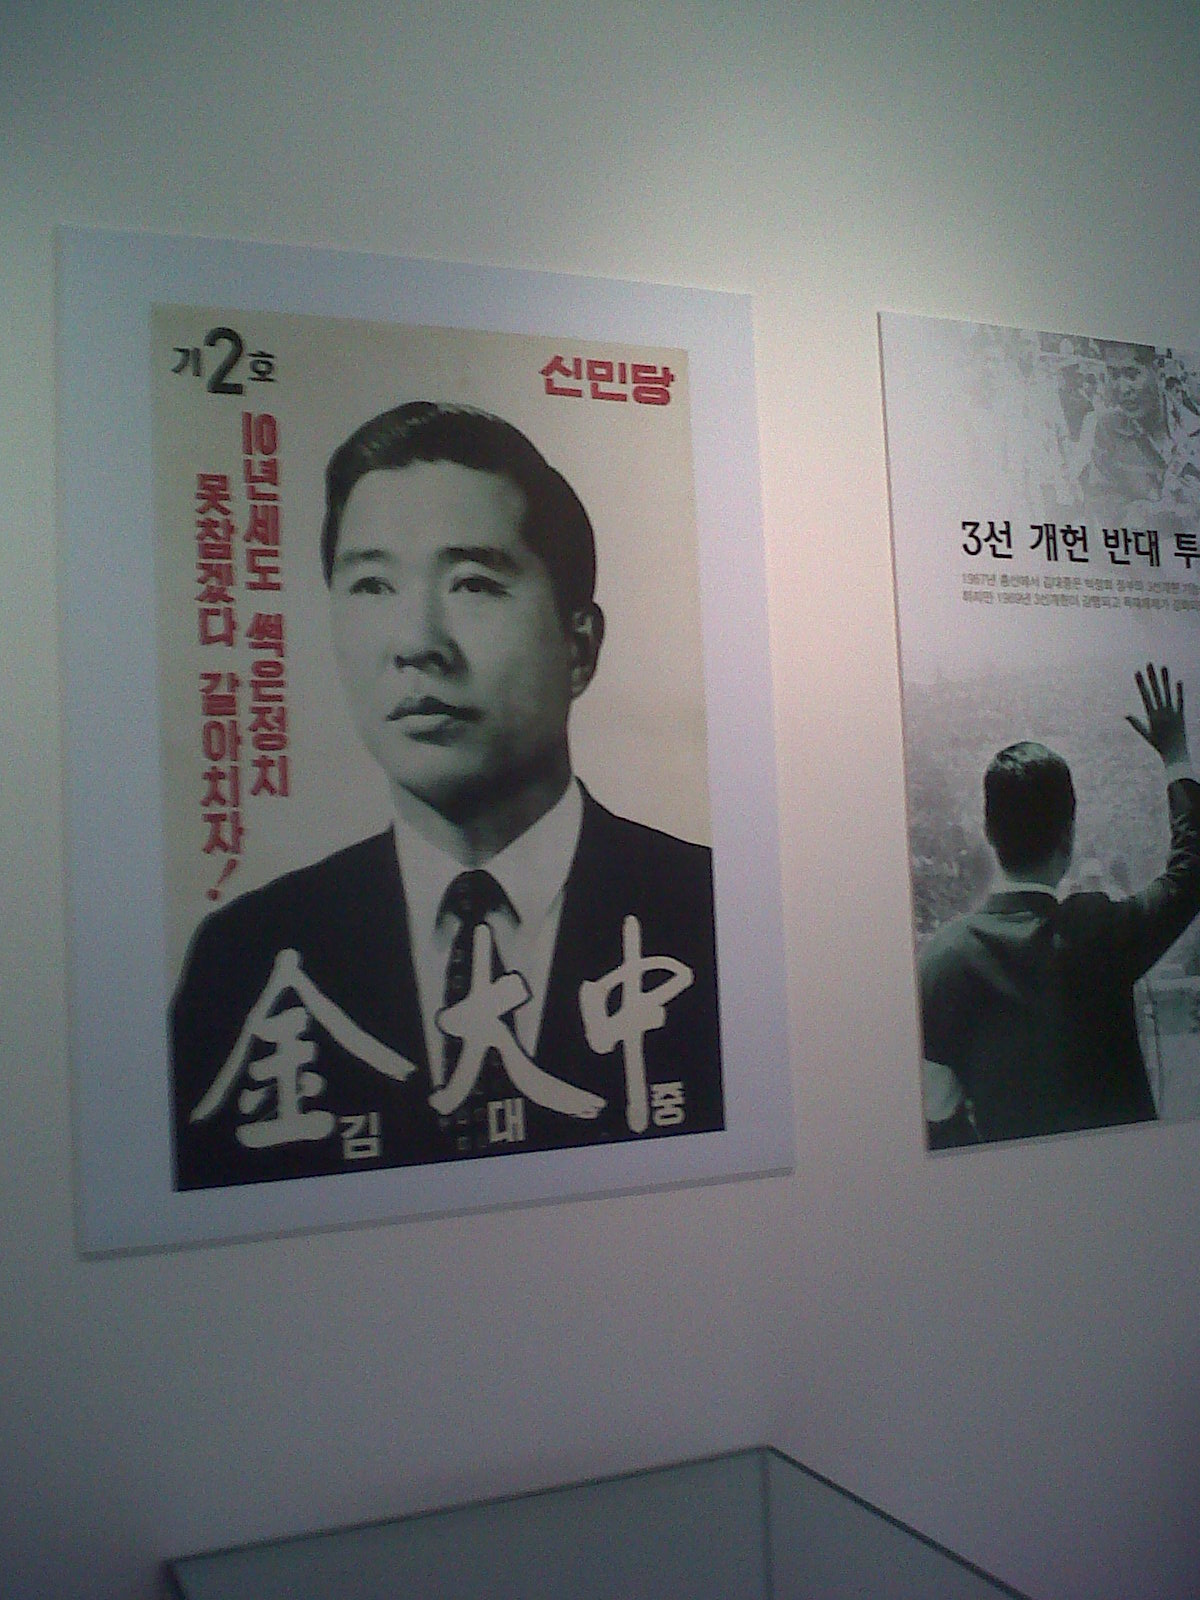 Kim Dae Jung Library - election posters calling for democracy and freedom